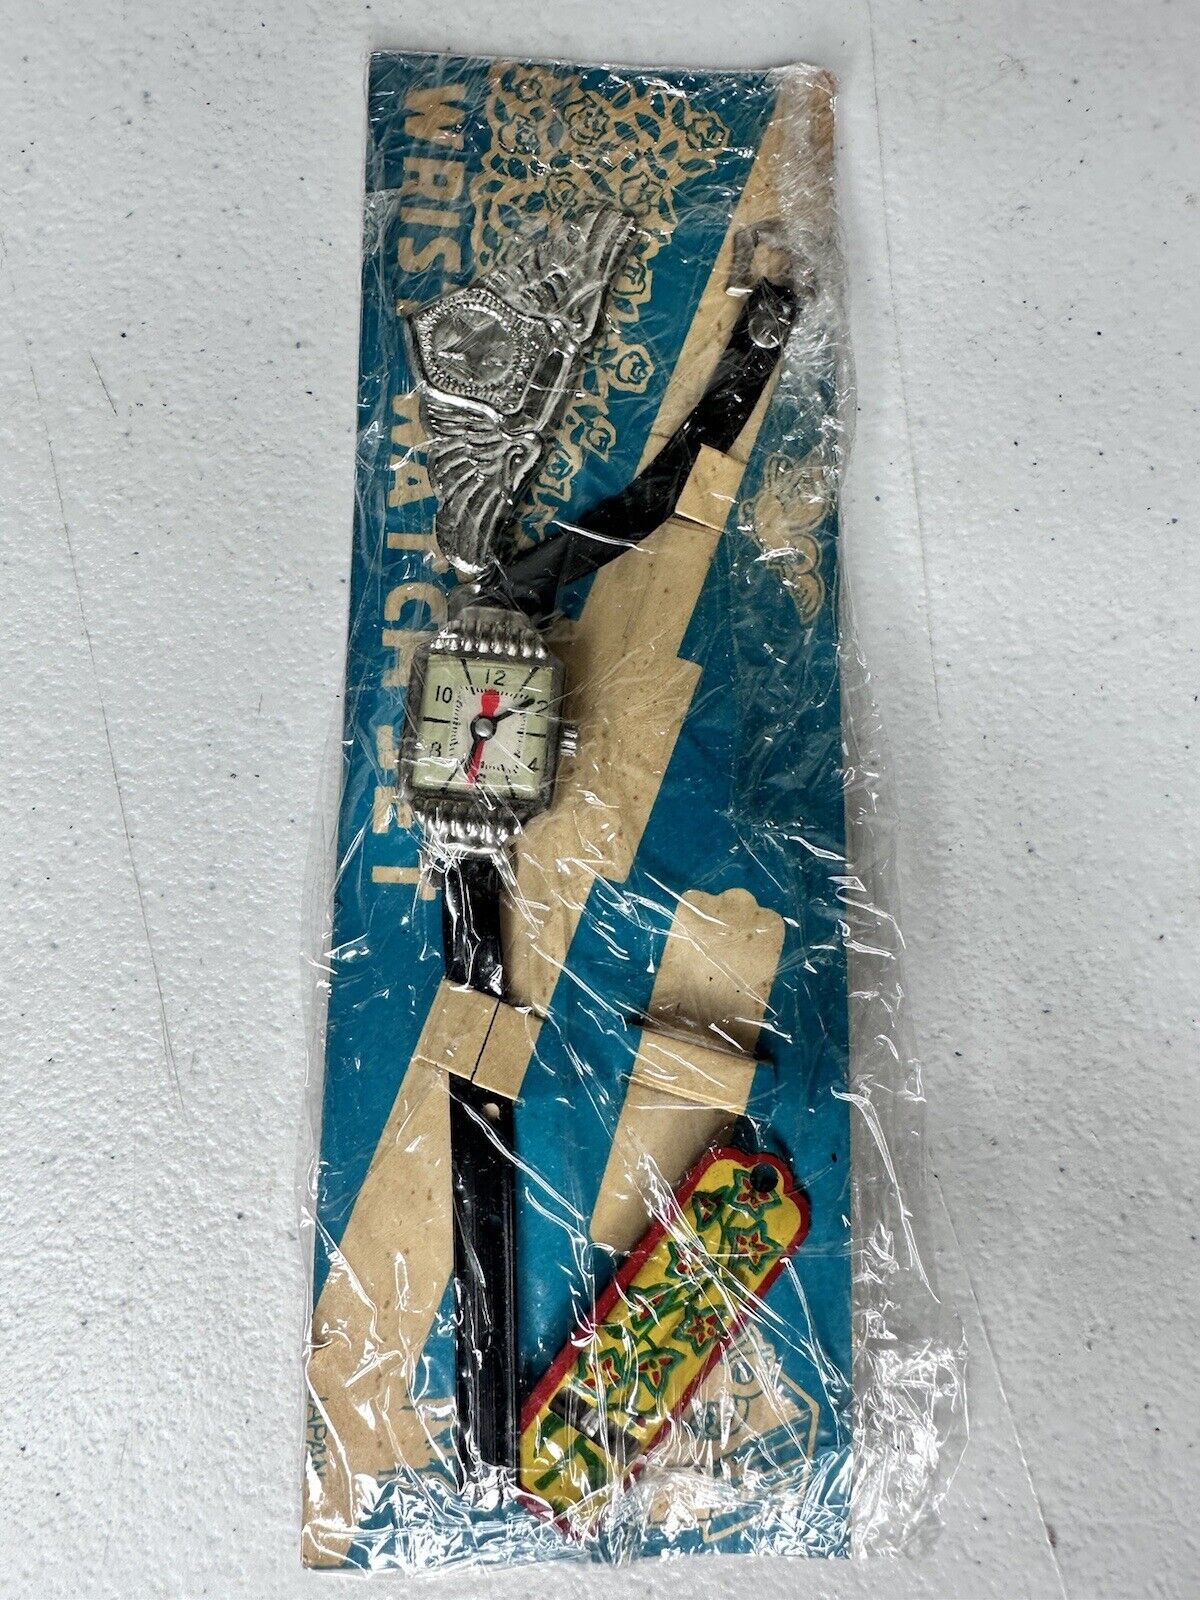 Vintage 1950s Japanese Toy Watch & Pin Set in Original Packaging - Rare Collectible - TreasuTiques